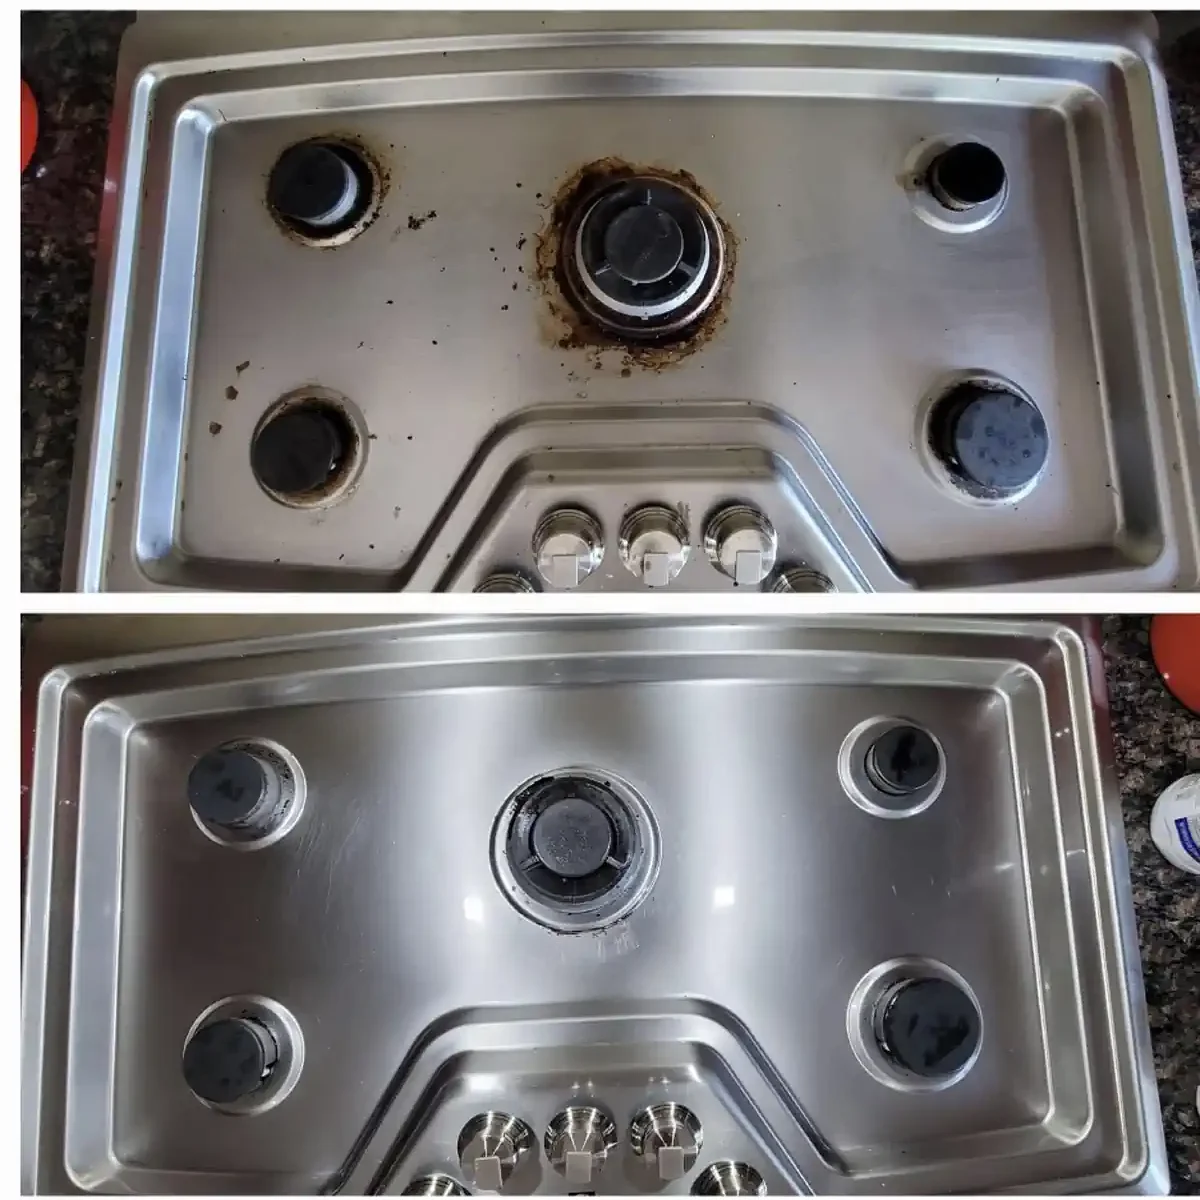 Clean stovetop 3 - before and after